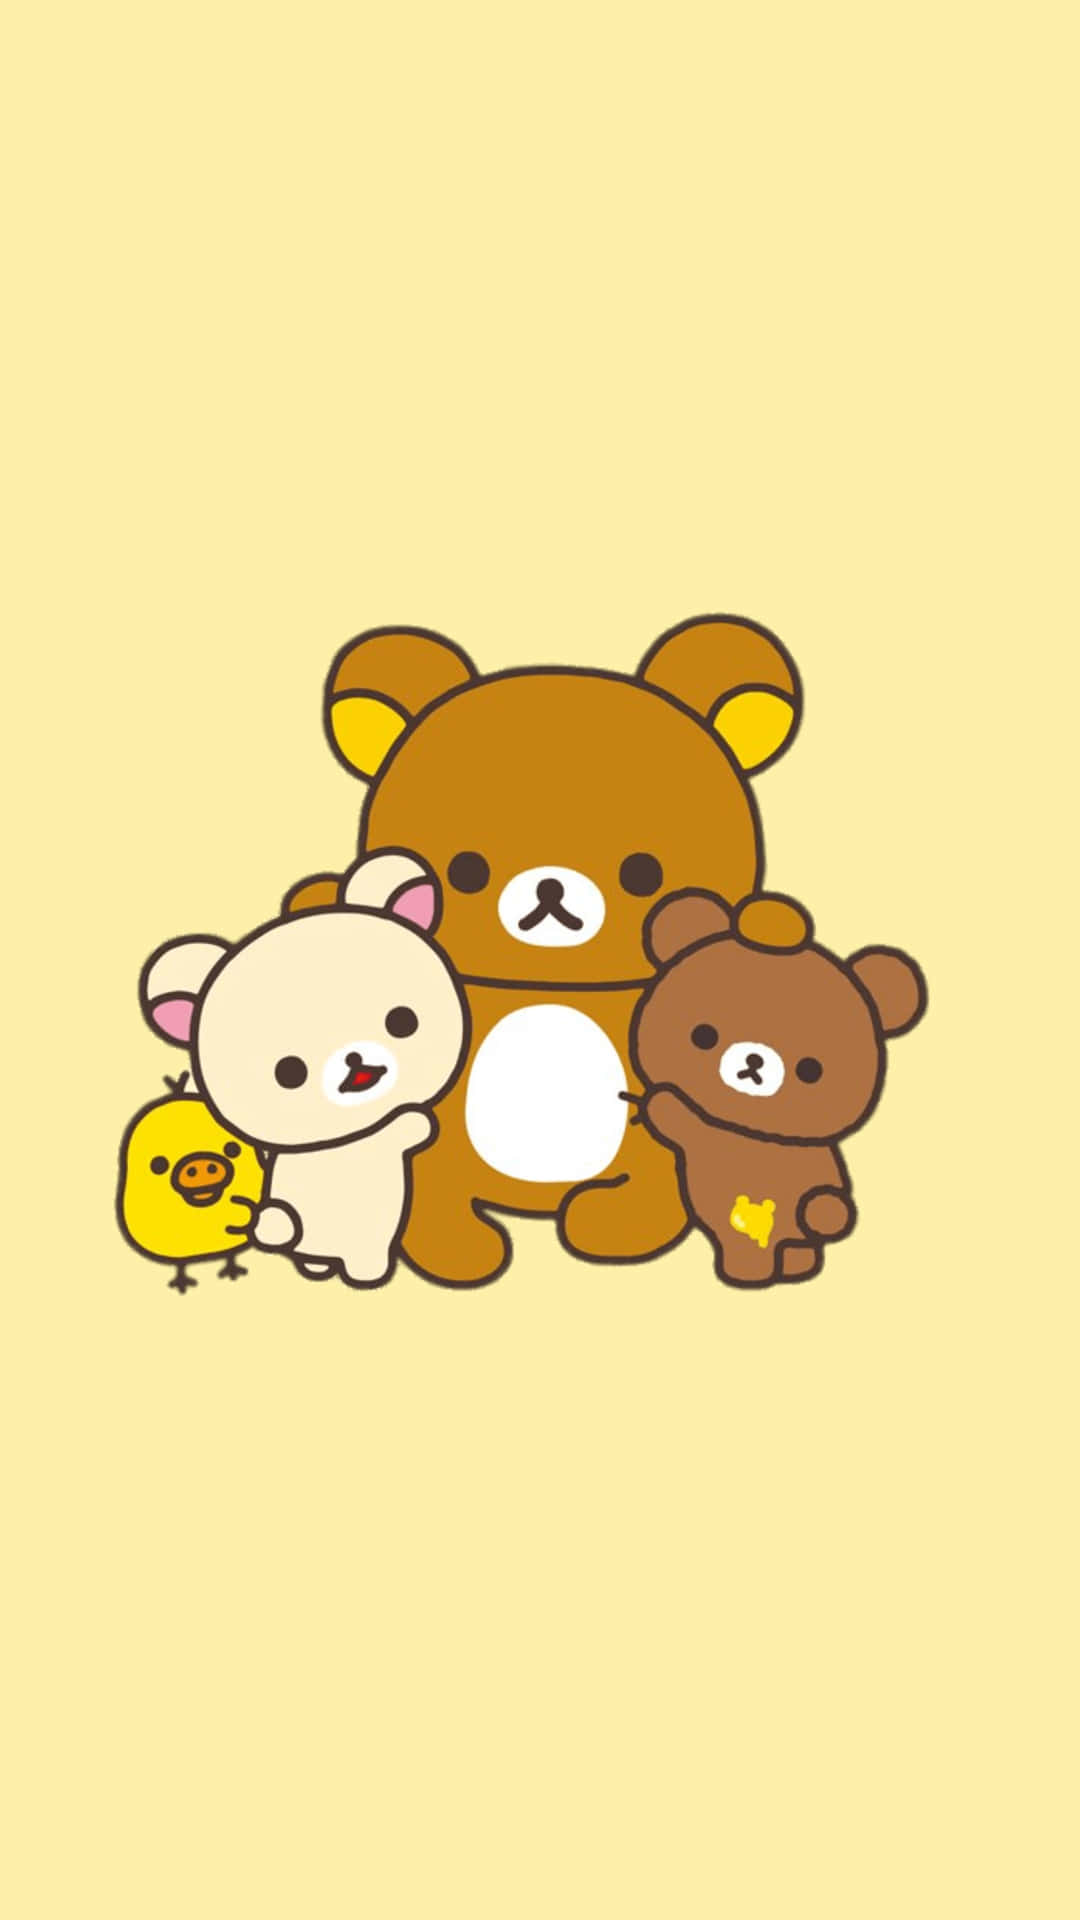 "Rilakkuma is ready for an adventure with you!" Wallpaper